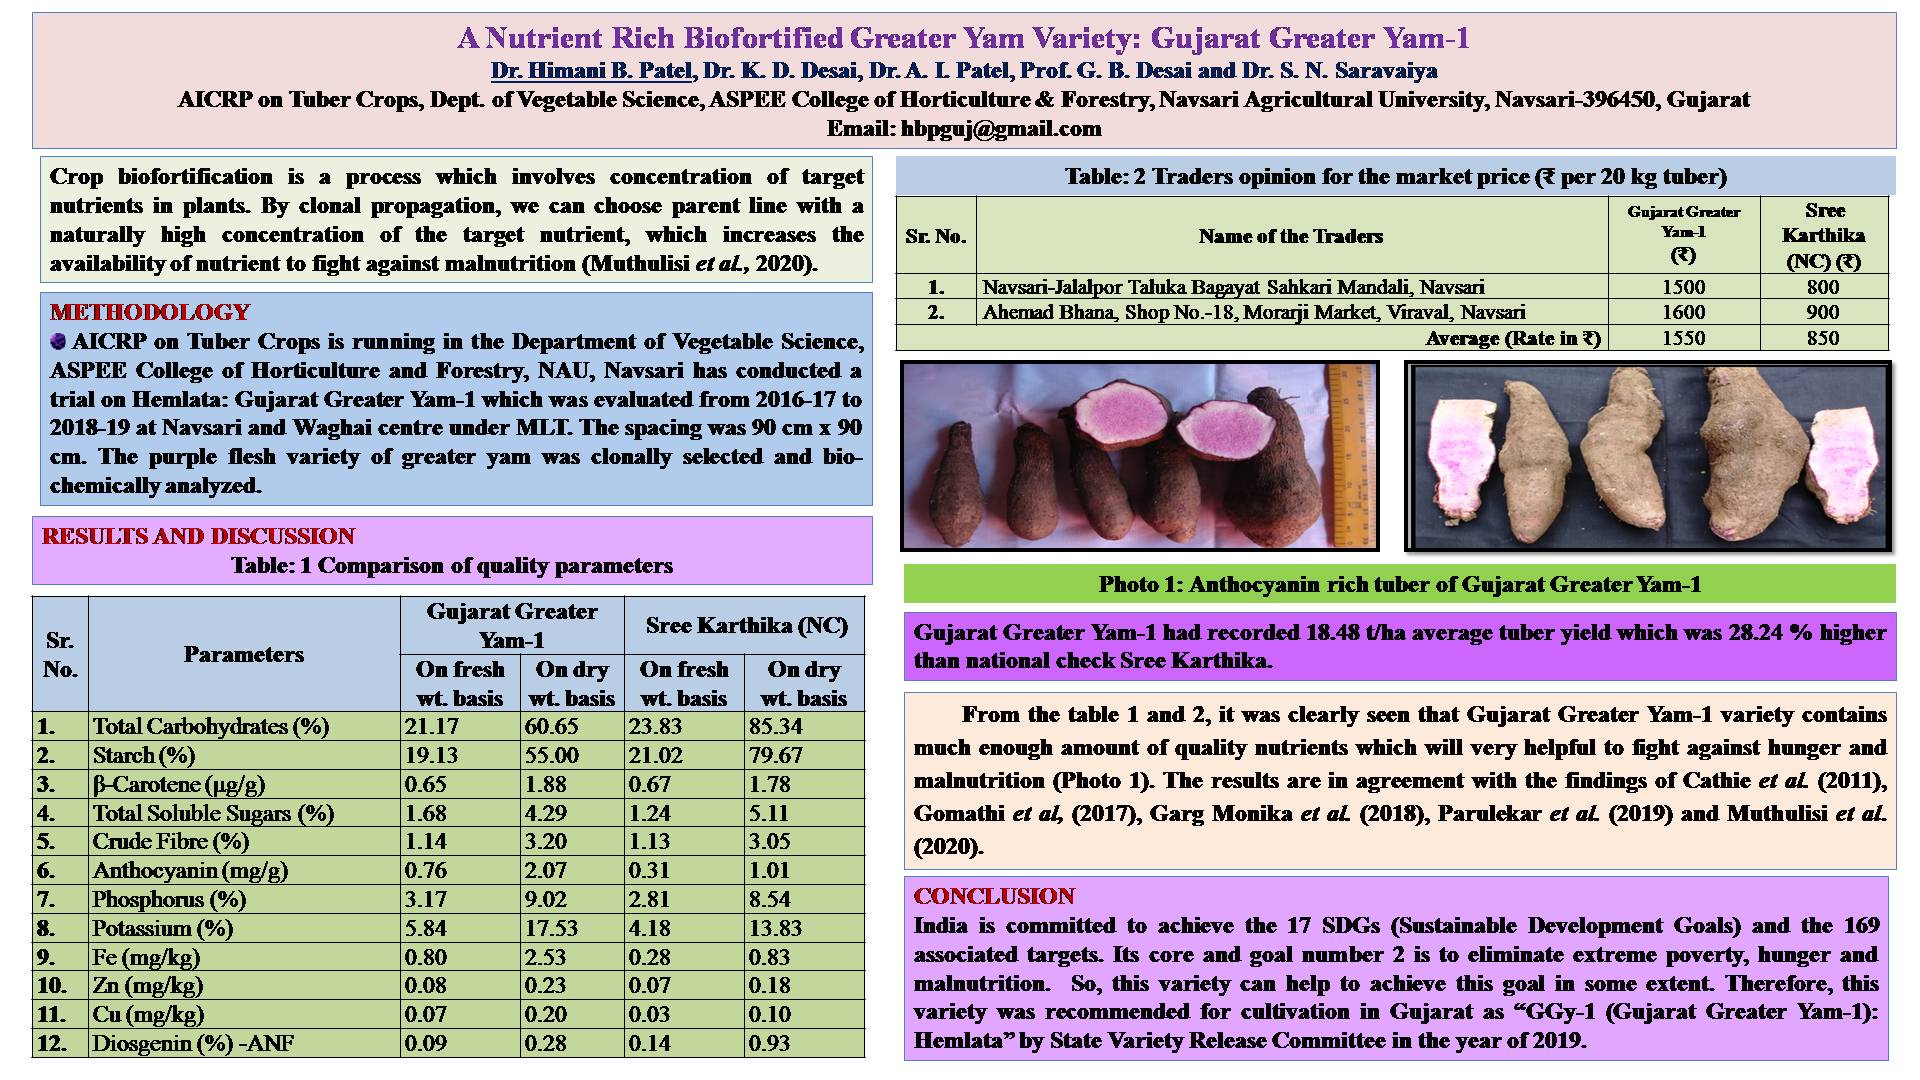 A Nutrient Rich Biofortified Greater Yam Variety: Gujarat Greater Yam-1